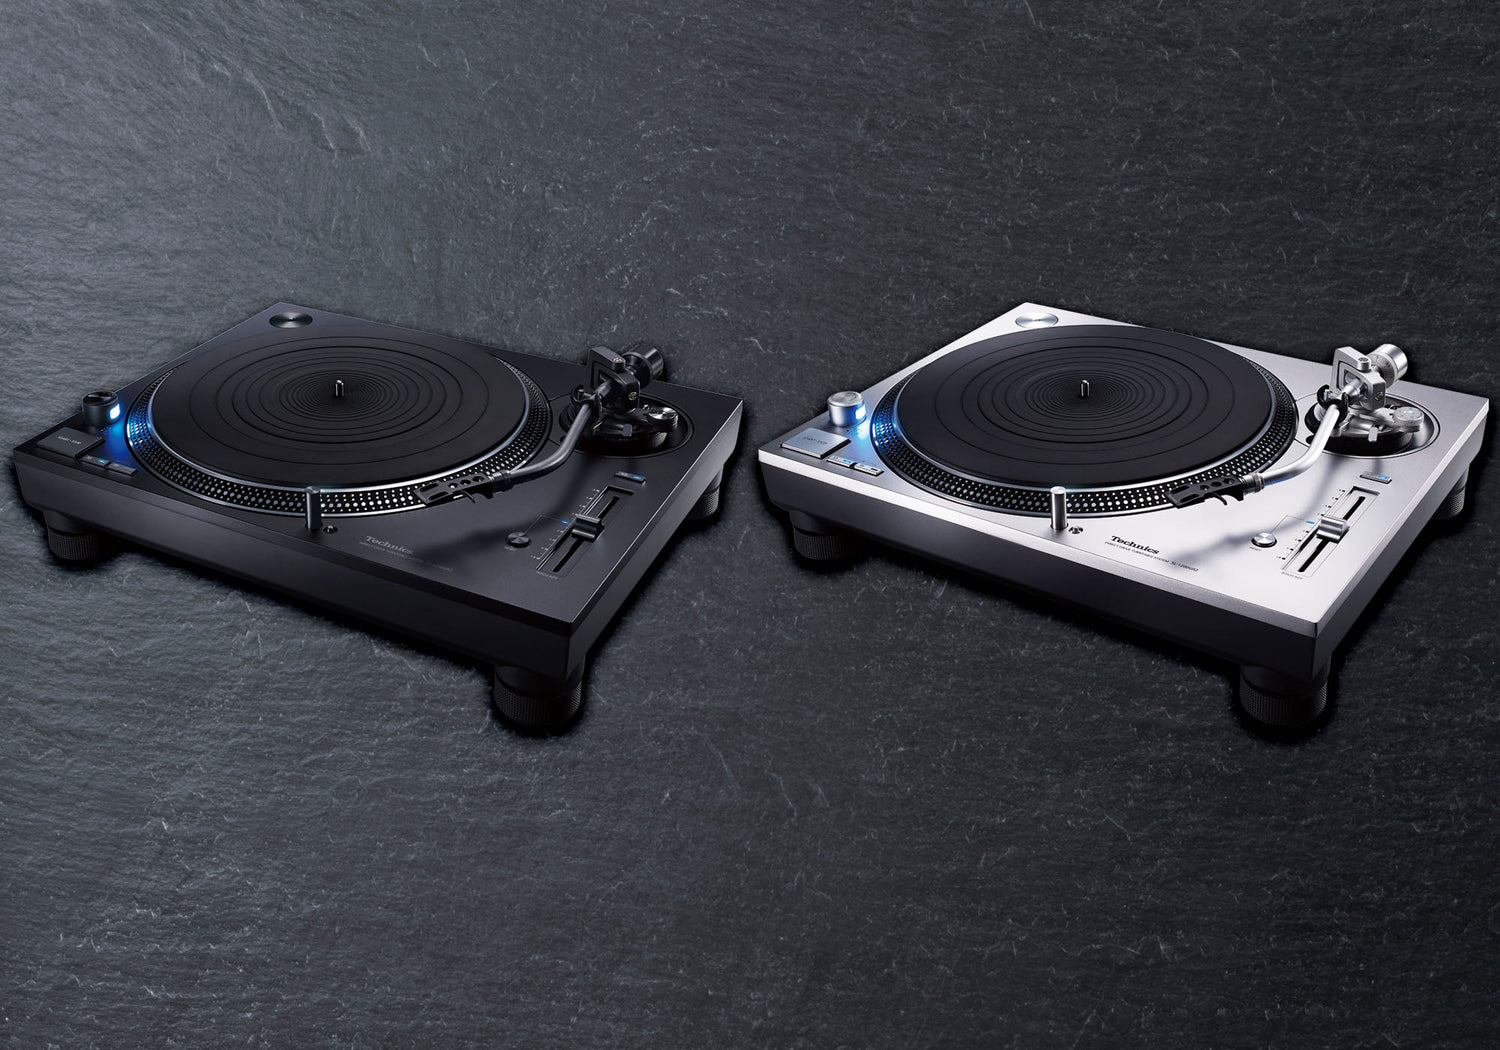 Technics Introduces the Next Generation of Direct Drive Turntables - the SL-1200GR2 and the SL-1210GR2